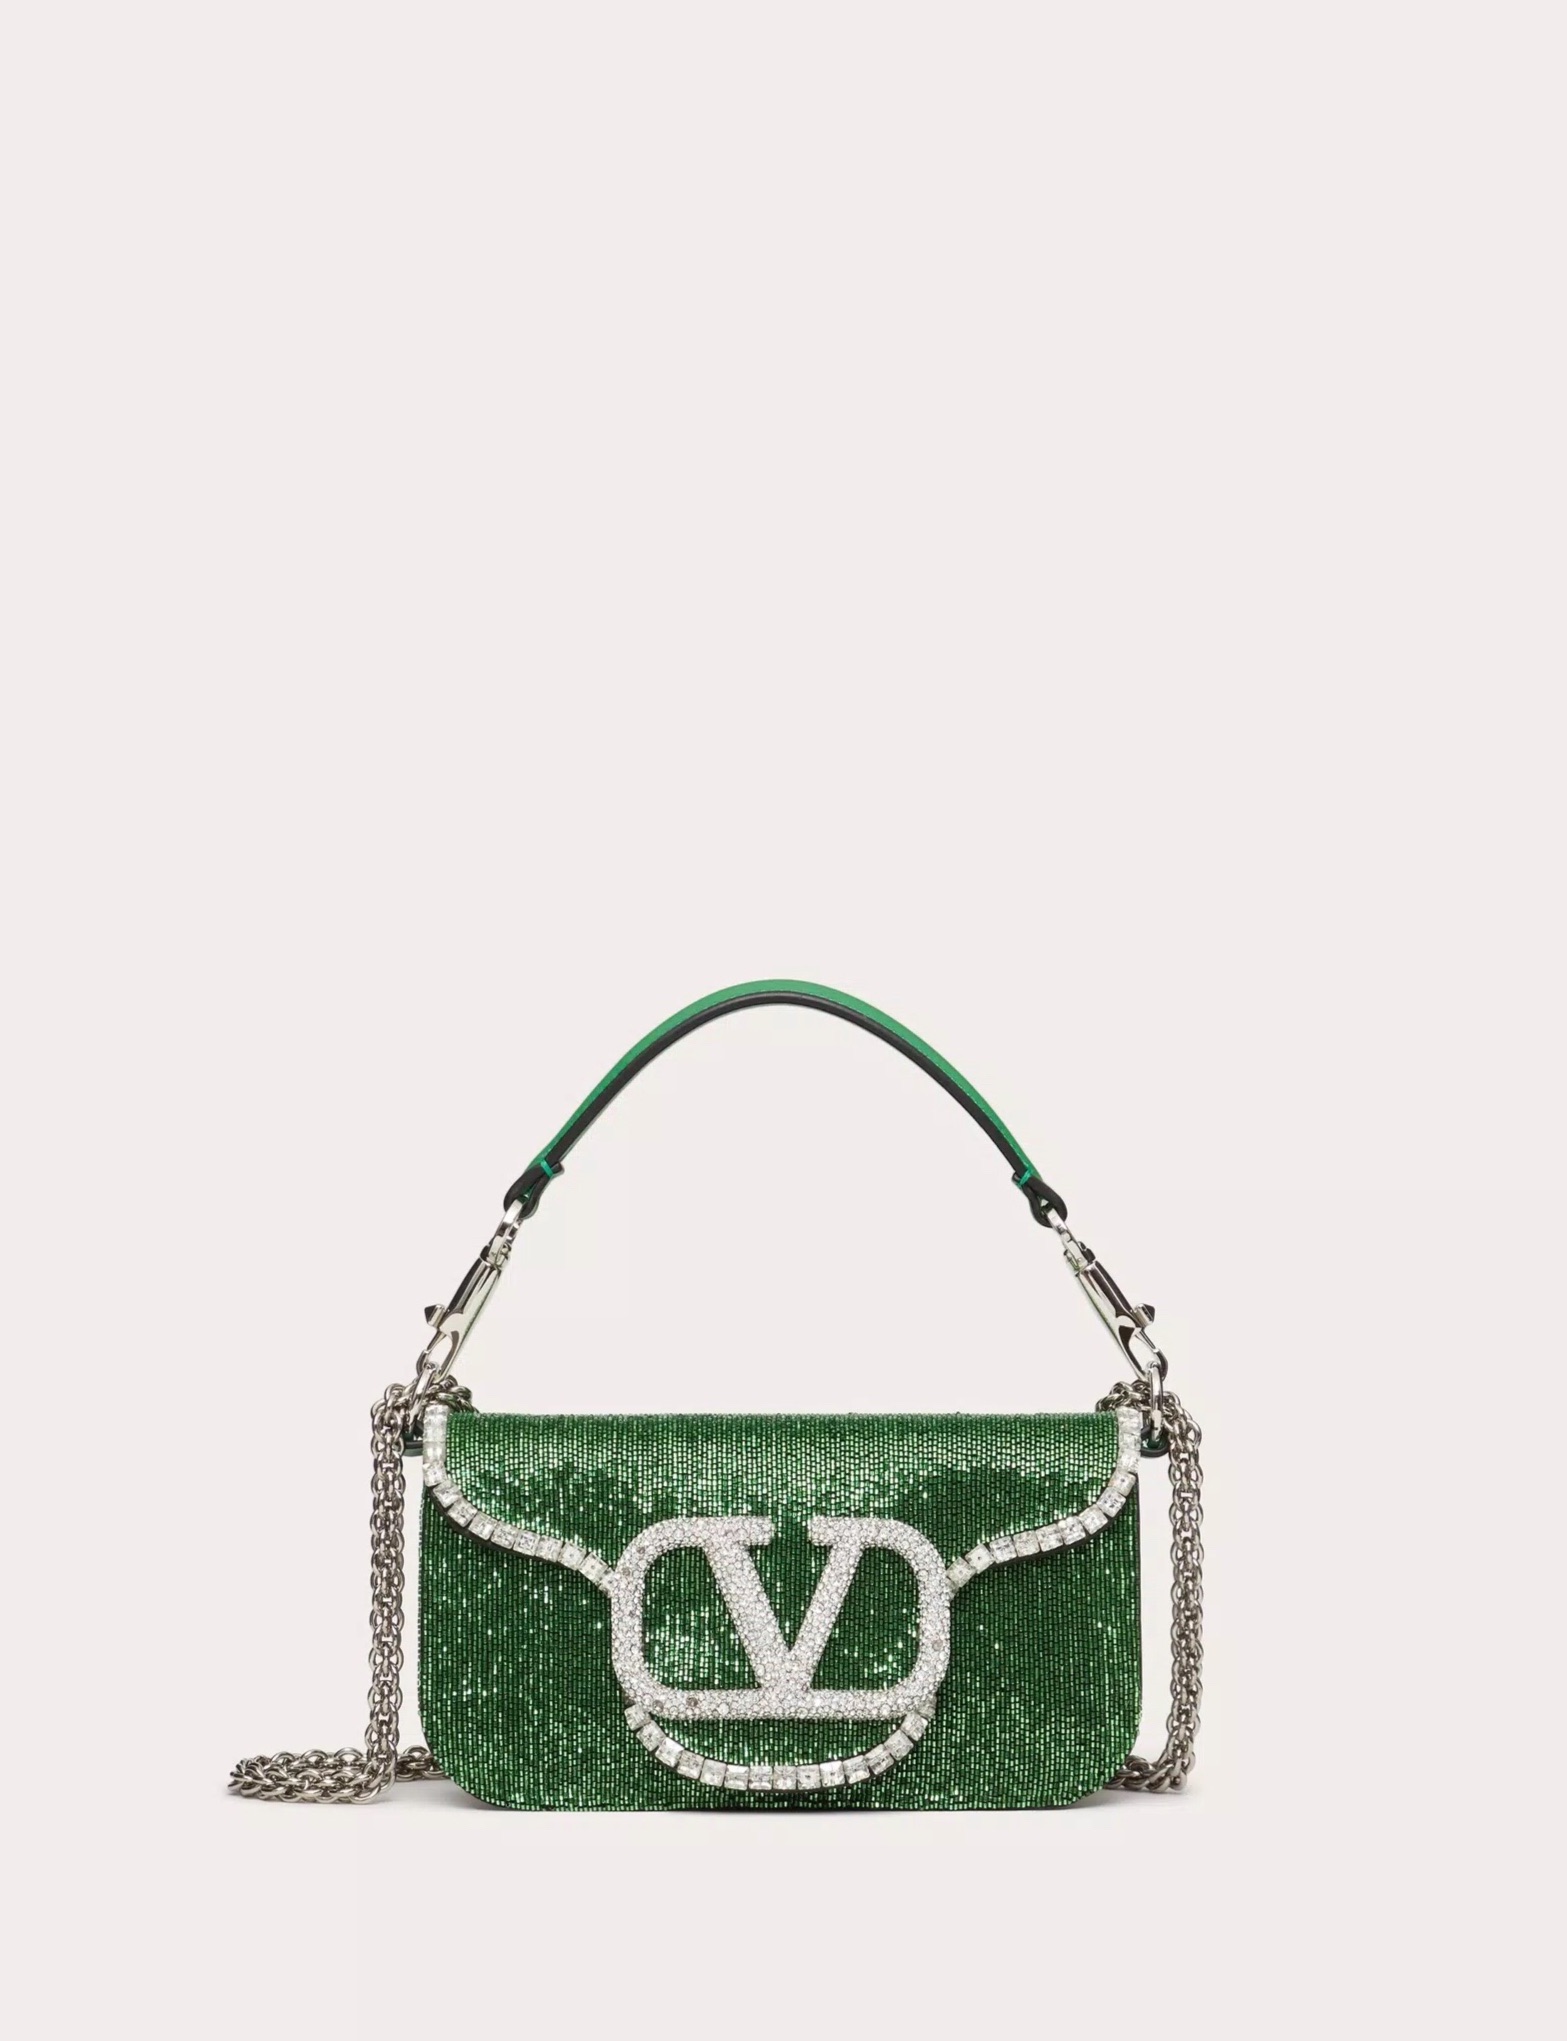 From Valentino to Prada and more—these are the best designer handbags of the month (фото 1)